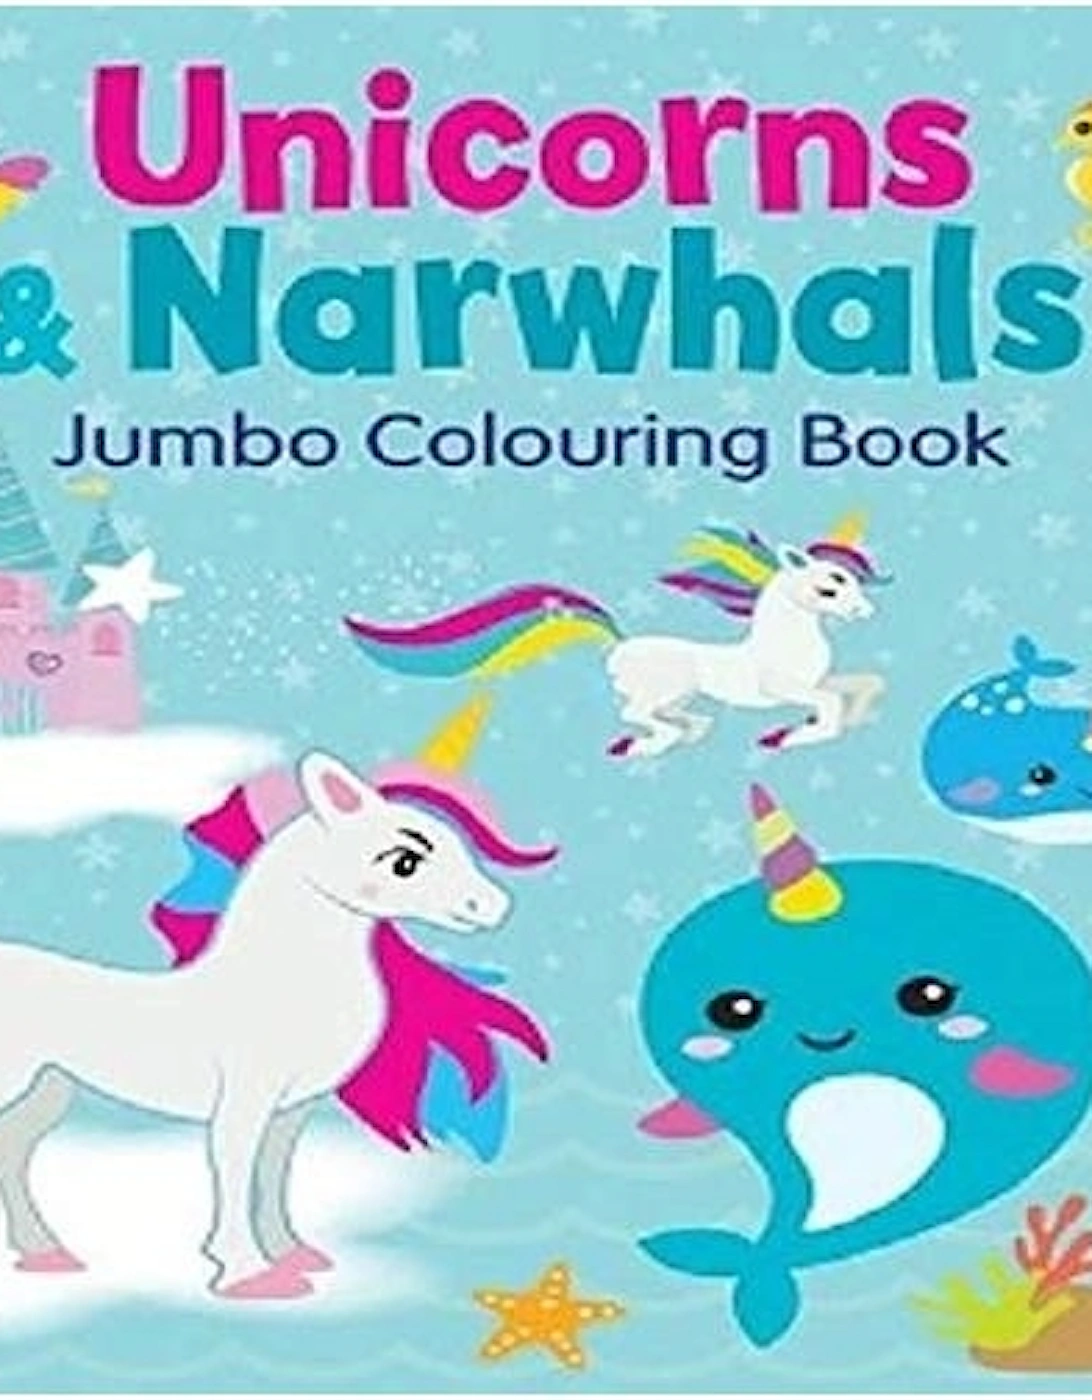 Unicorns & Narwhals Colouring Book, 2 of 1